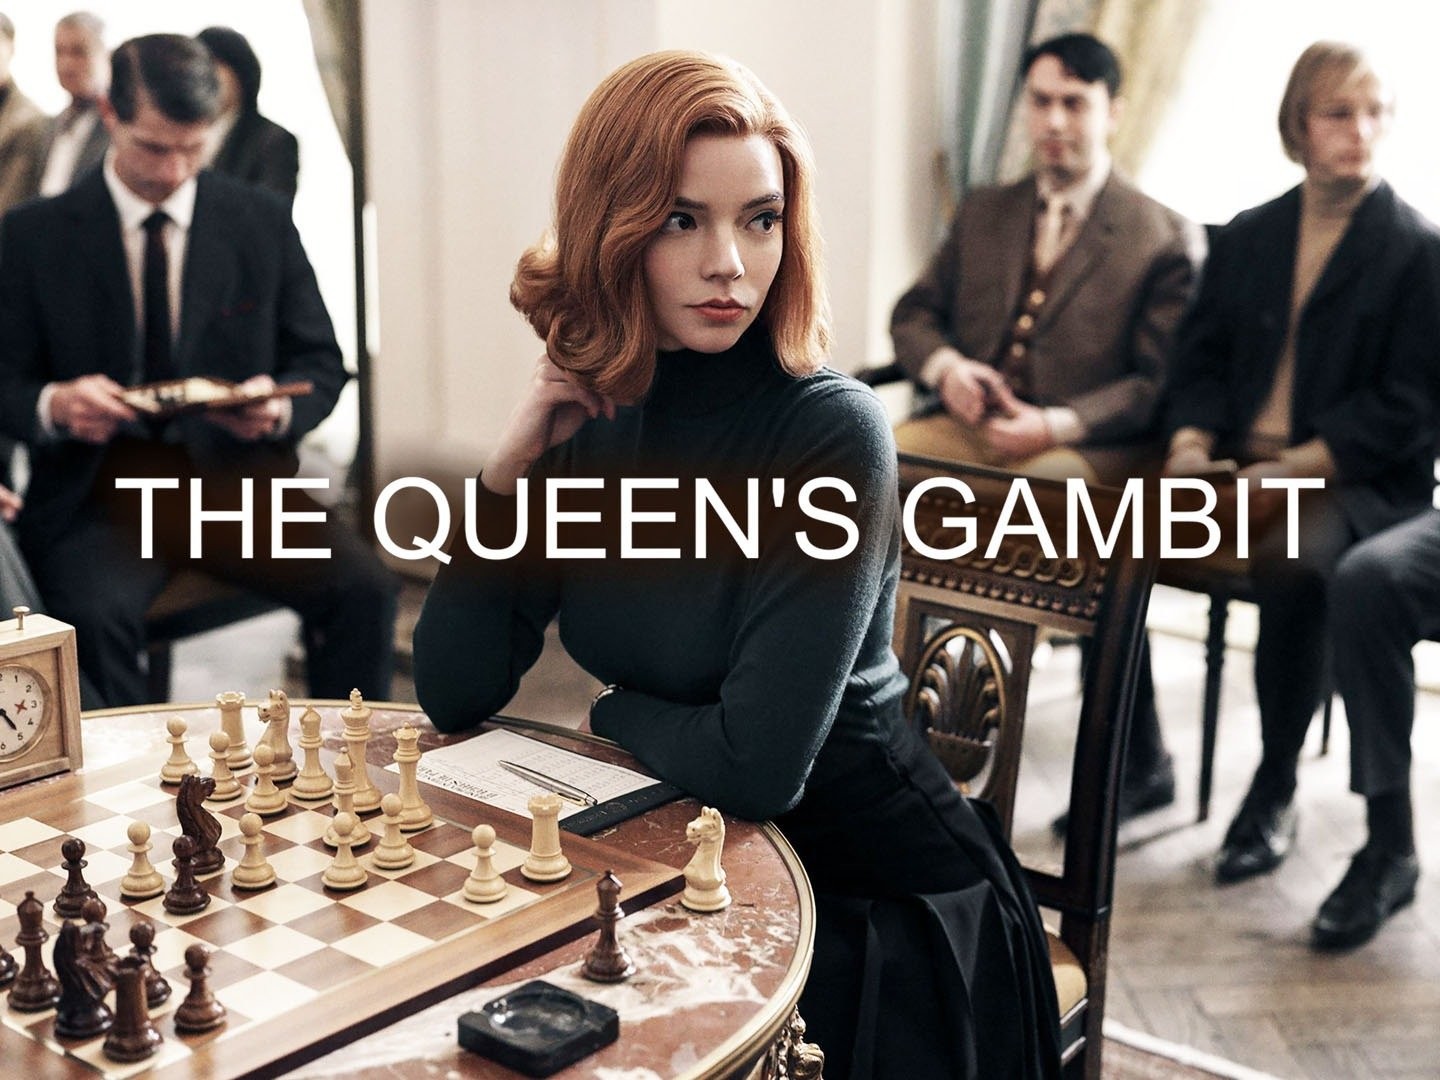 Opinion: “The Queen's Gambit” is an intelligent, detailed